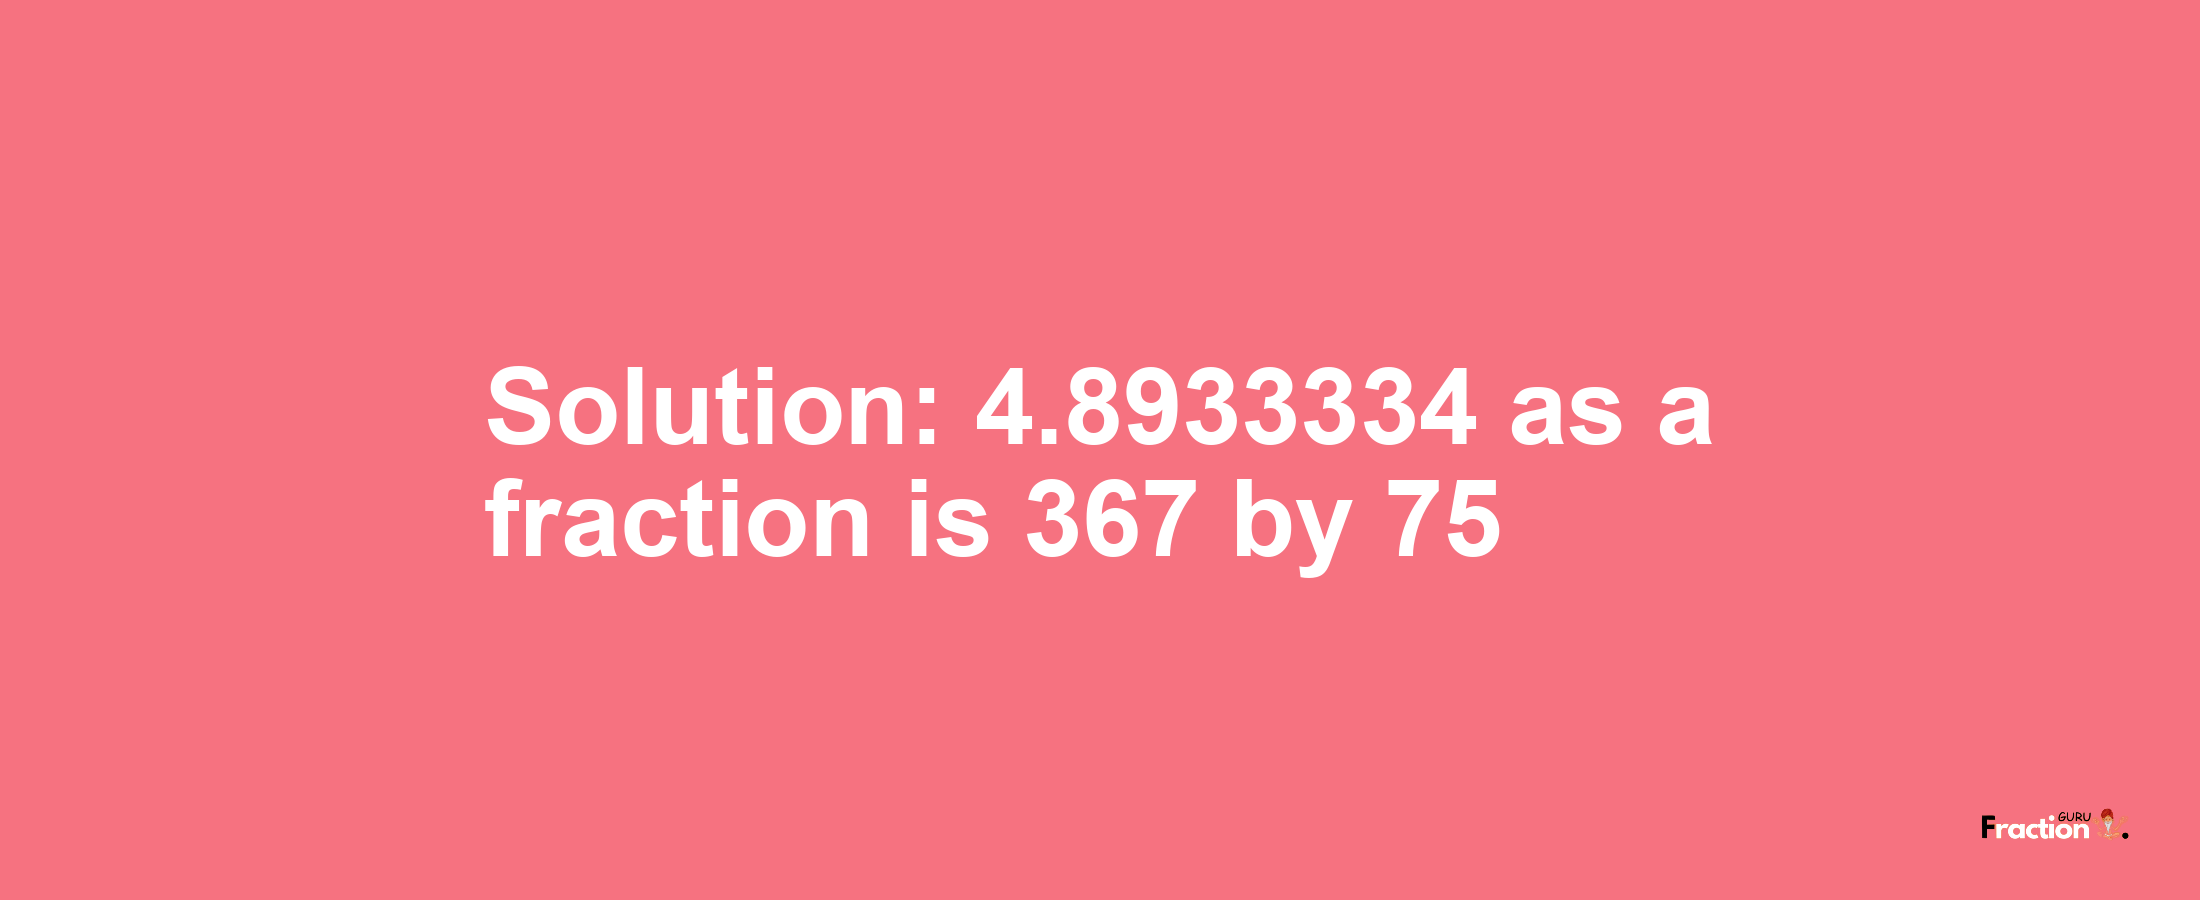 Solution:4.8933334 as a fraction is 367/75